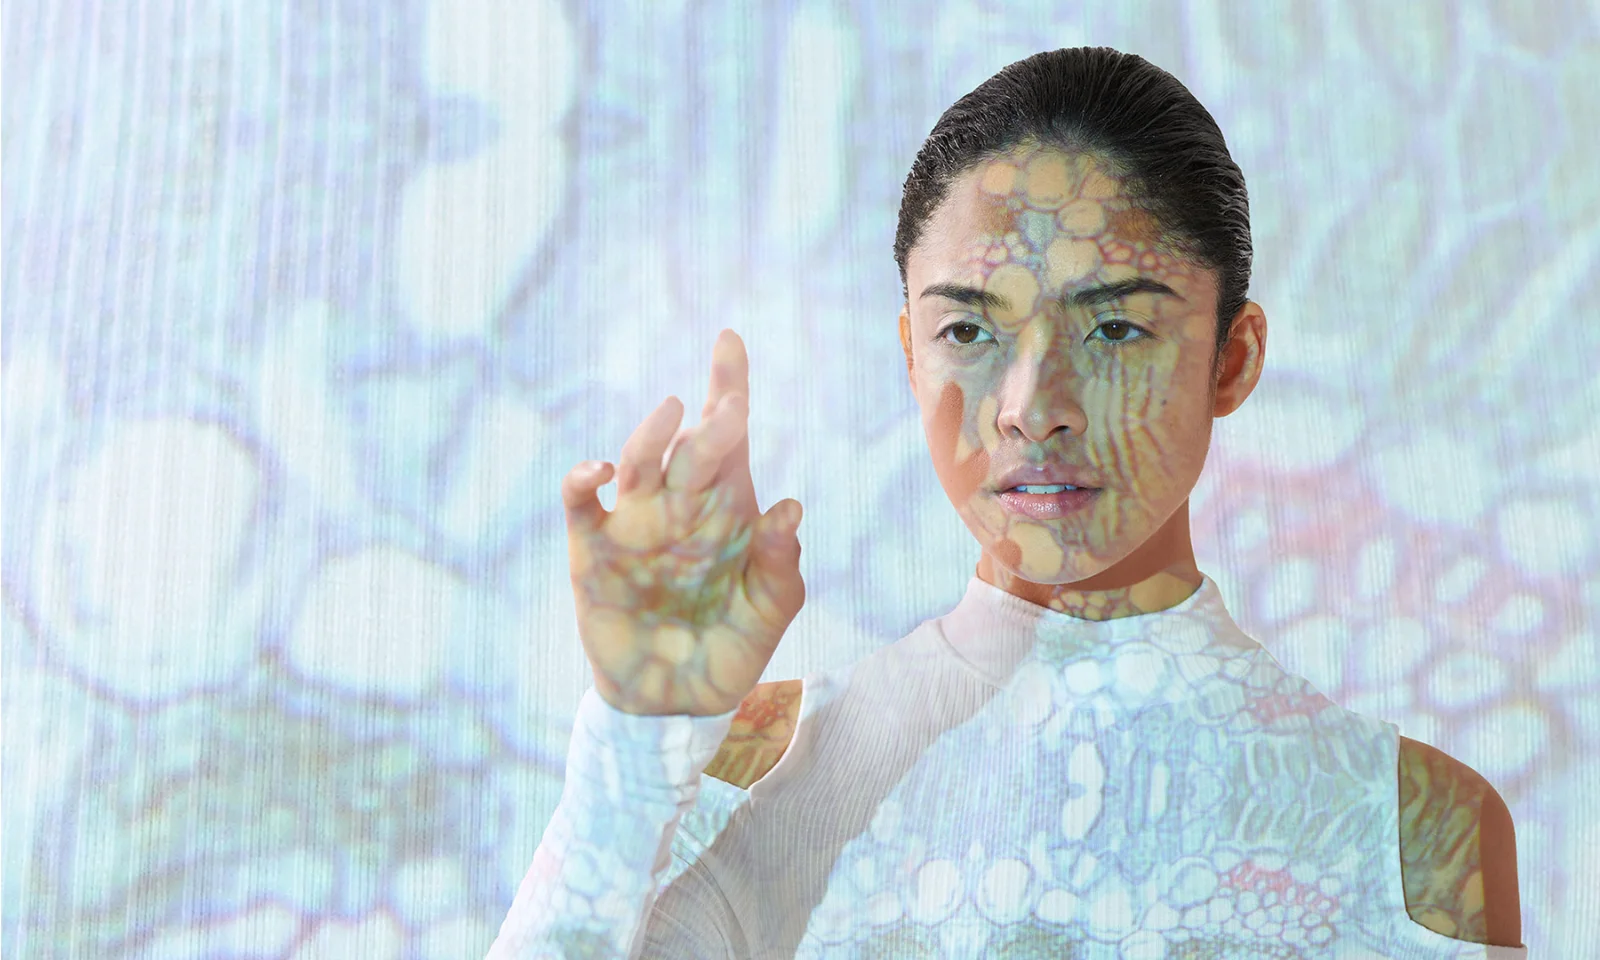 This key visual showcases a woman with digital patterns projected onto her face and body, symbolizing the integration of artificial intelligence and human interaction. The image represents the cutting-edge advancements in AI technology and its seamless blending with human capabilities.